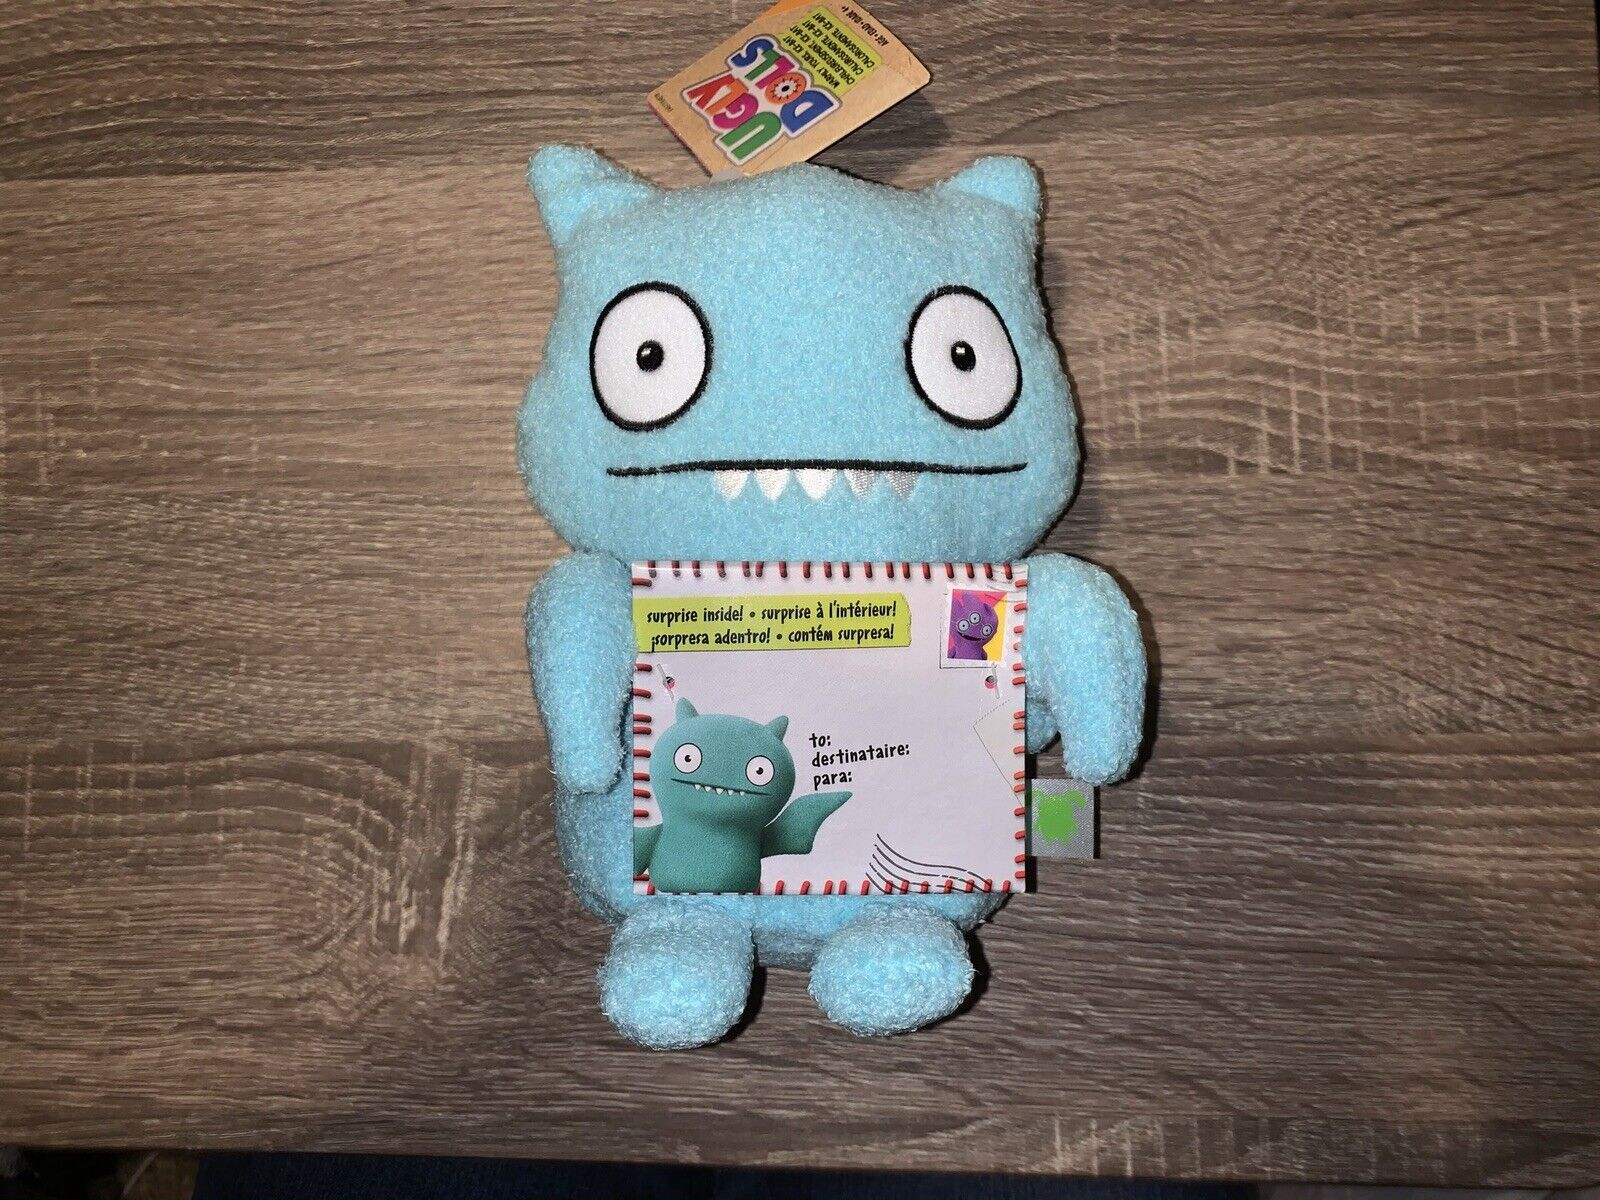 Ugly Dolls Yours Truly, Ice Bat 9” Plush Blue Uglydoll New With Tags Hasbro